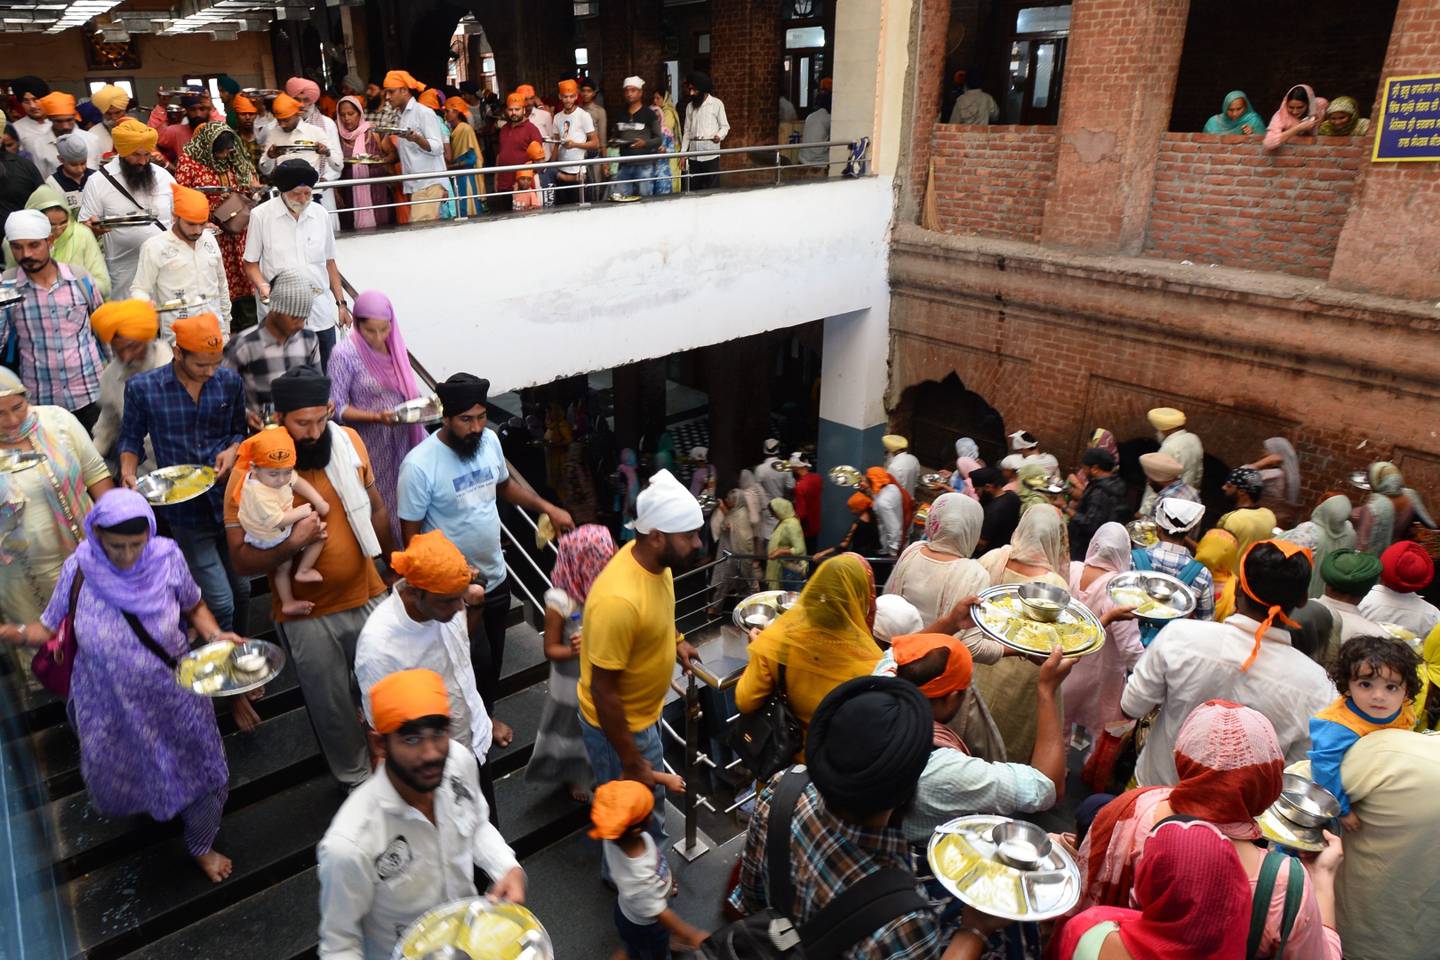 The world's largest free kitchen at Punjab's Golden Temple feeds 100,000 a day